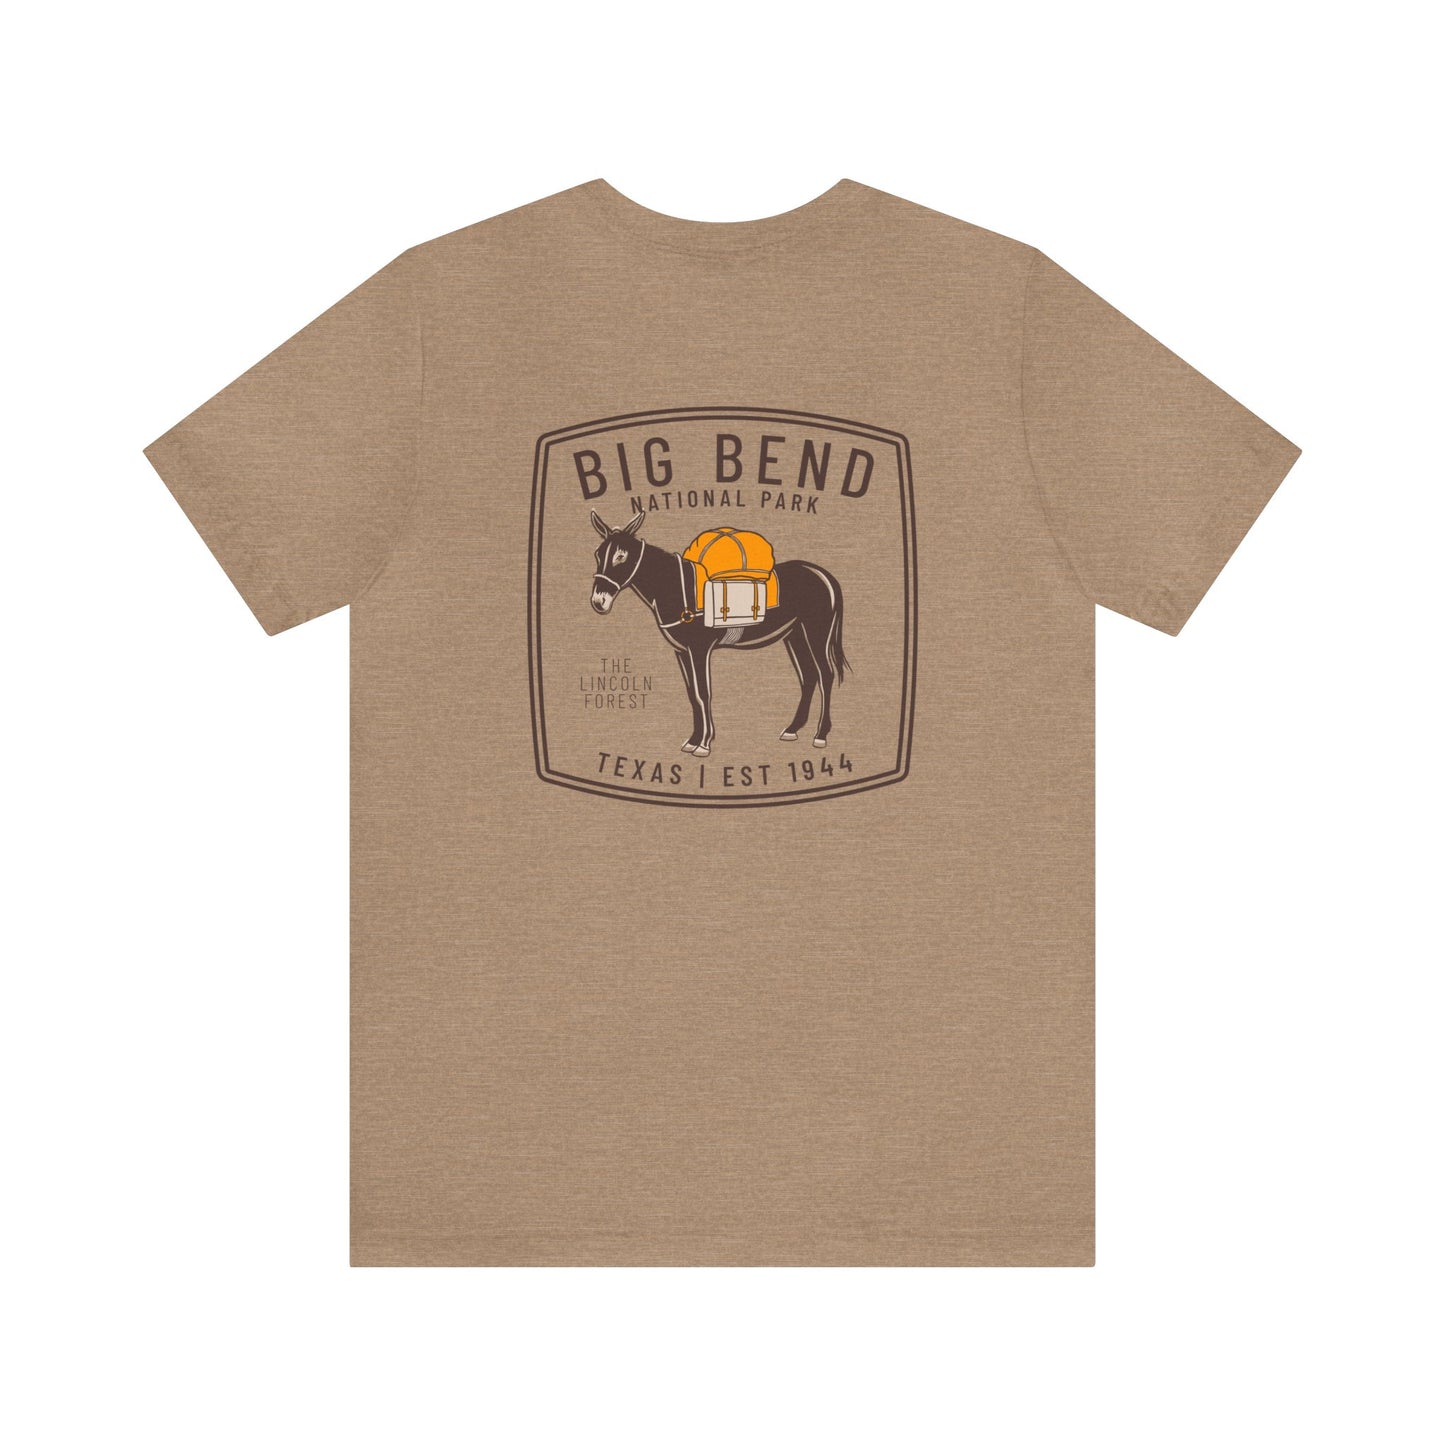 Big Bend National Park ShirtBring home your favorite fun little trail buddy from Big Bend National Park of Texas into your wardrobe with this simple and lightweight t-shirt. Features a small mi